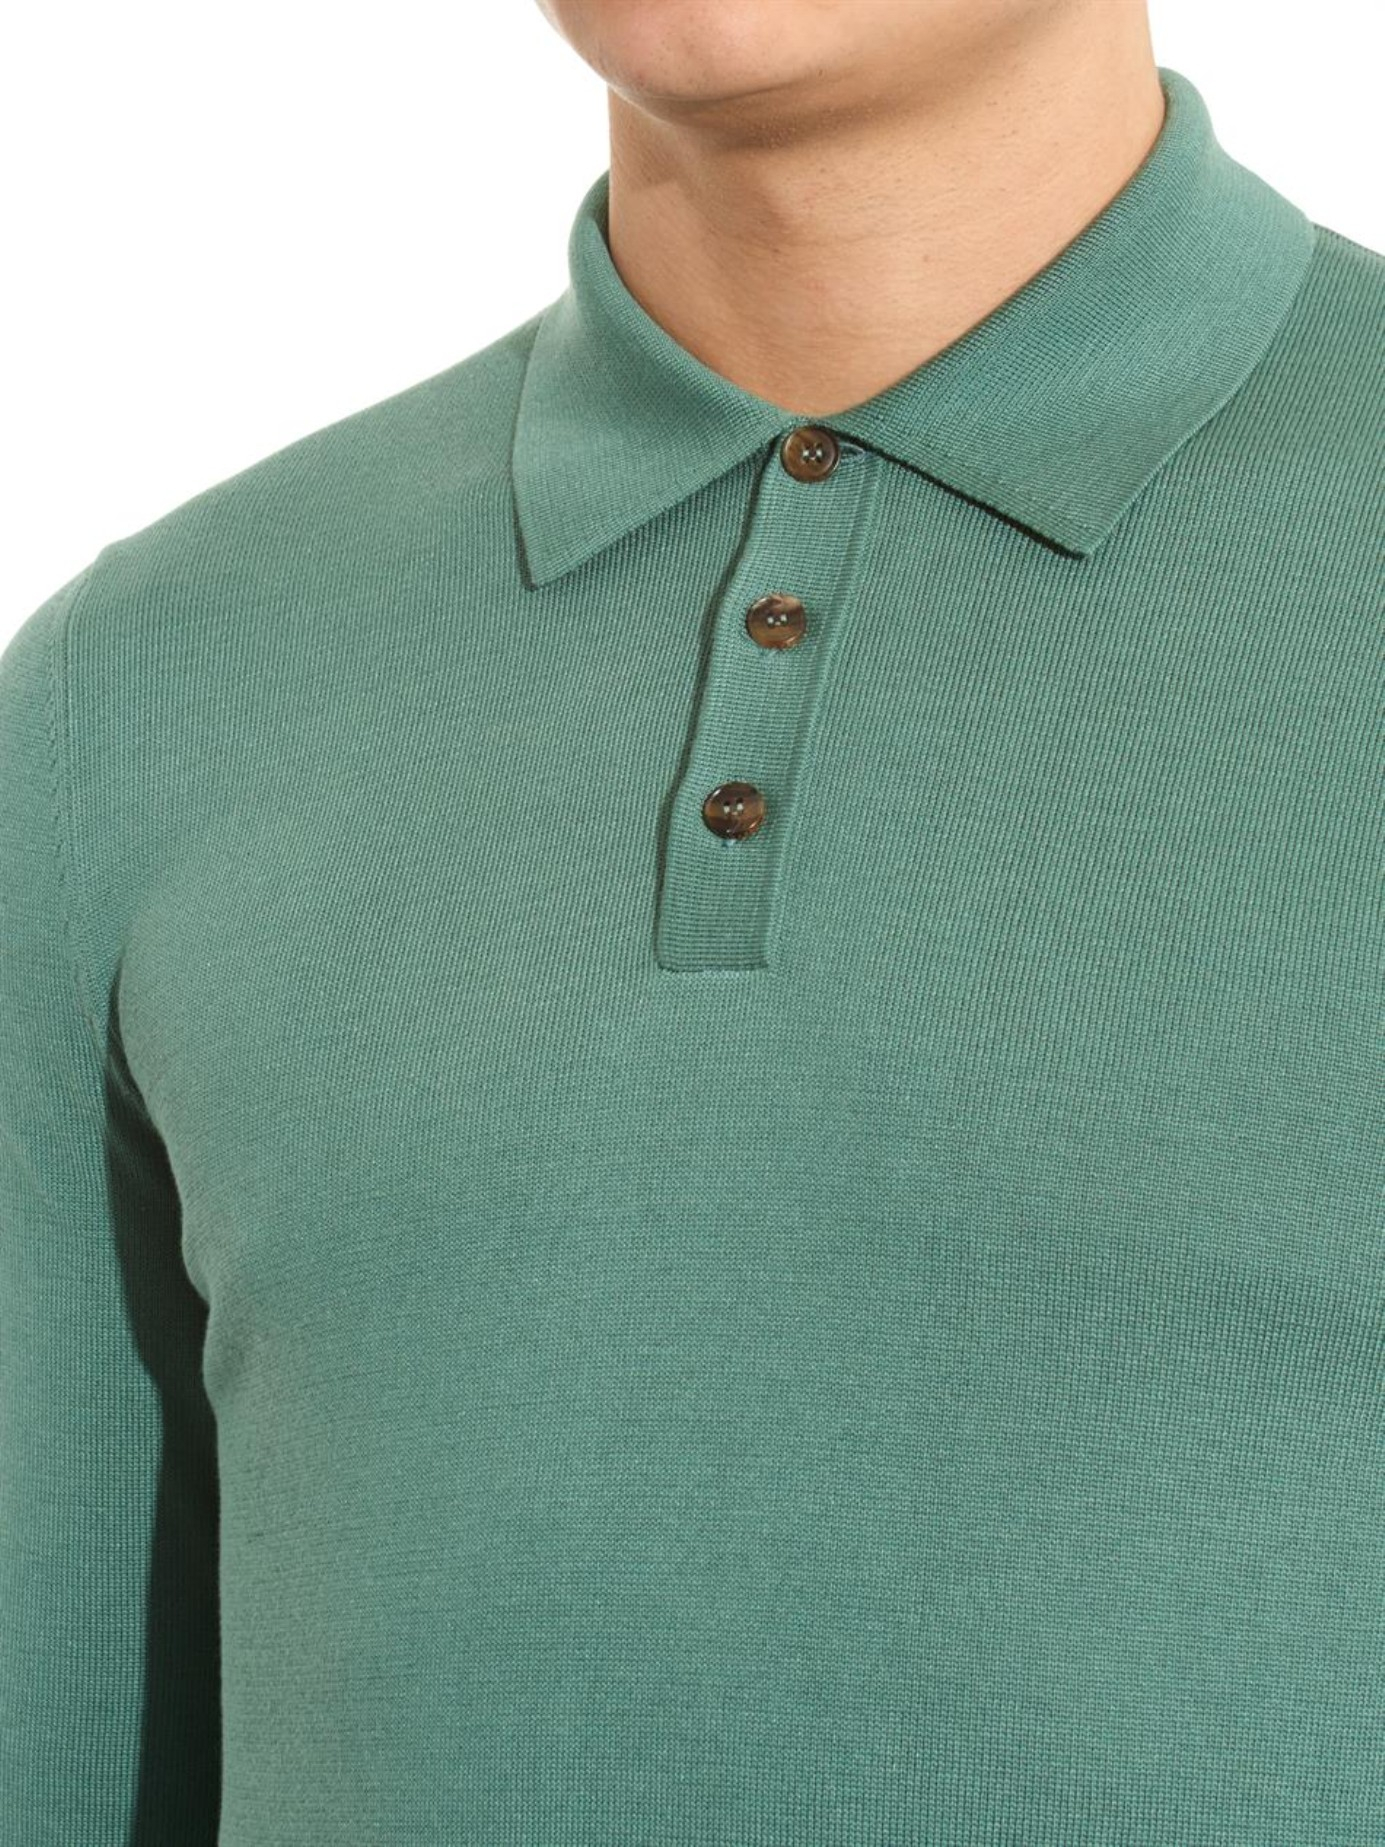 Lyst - Gucci Silk And Cotton-blend Polo Shirt in Green for Men